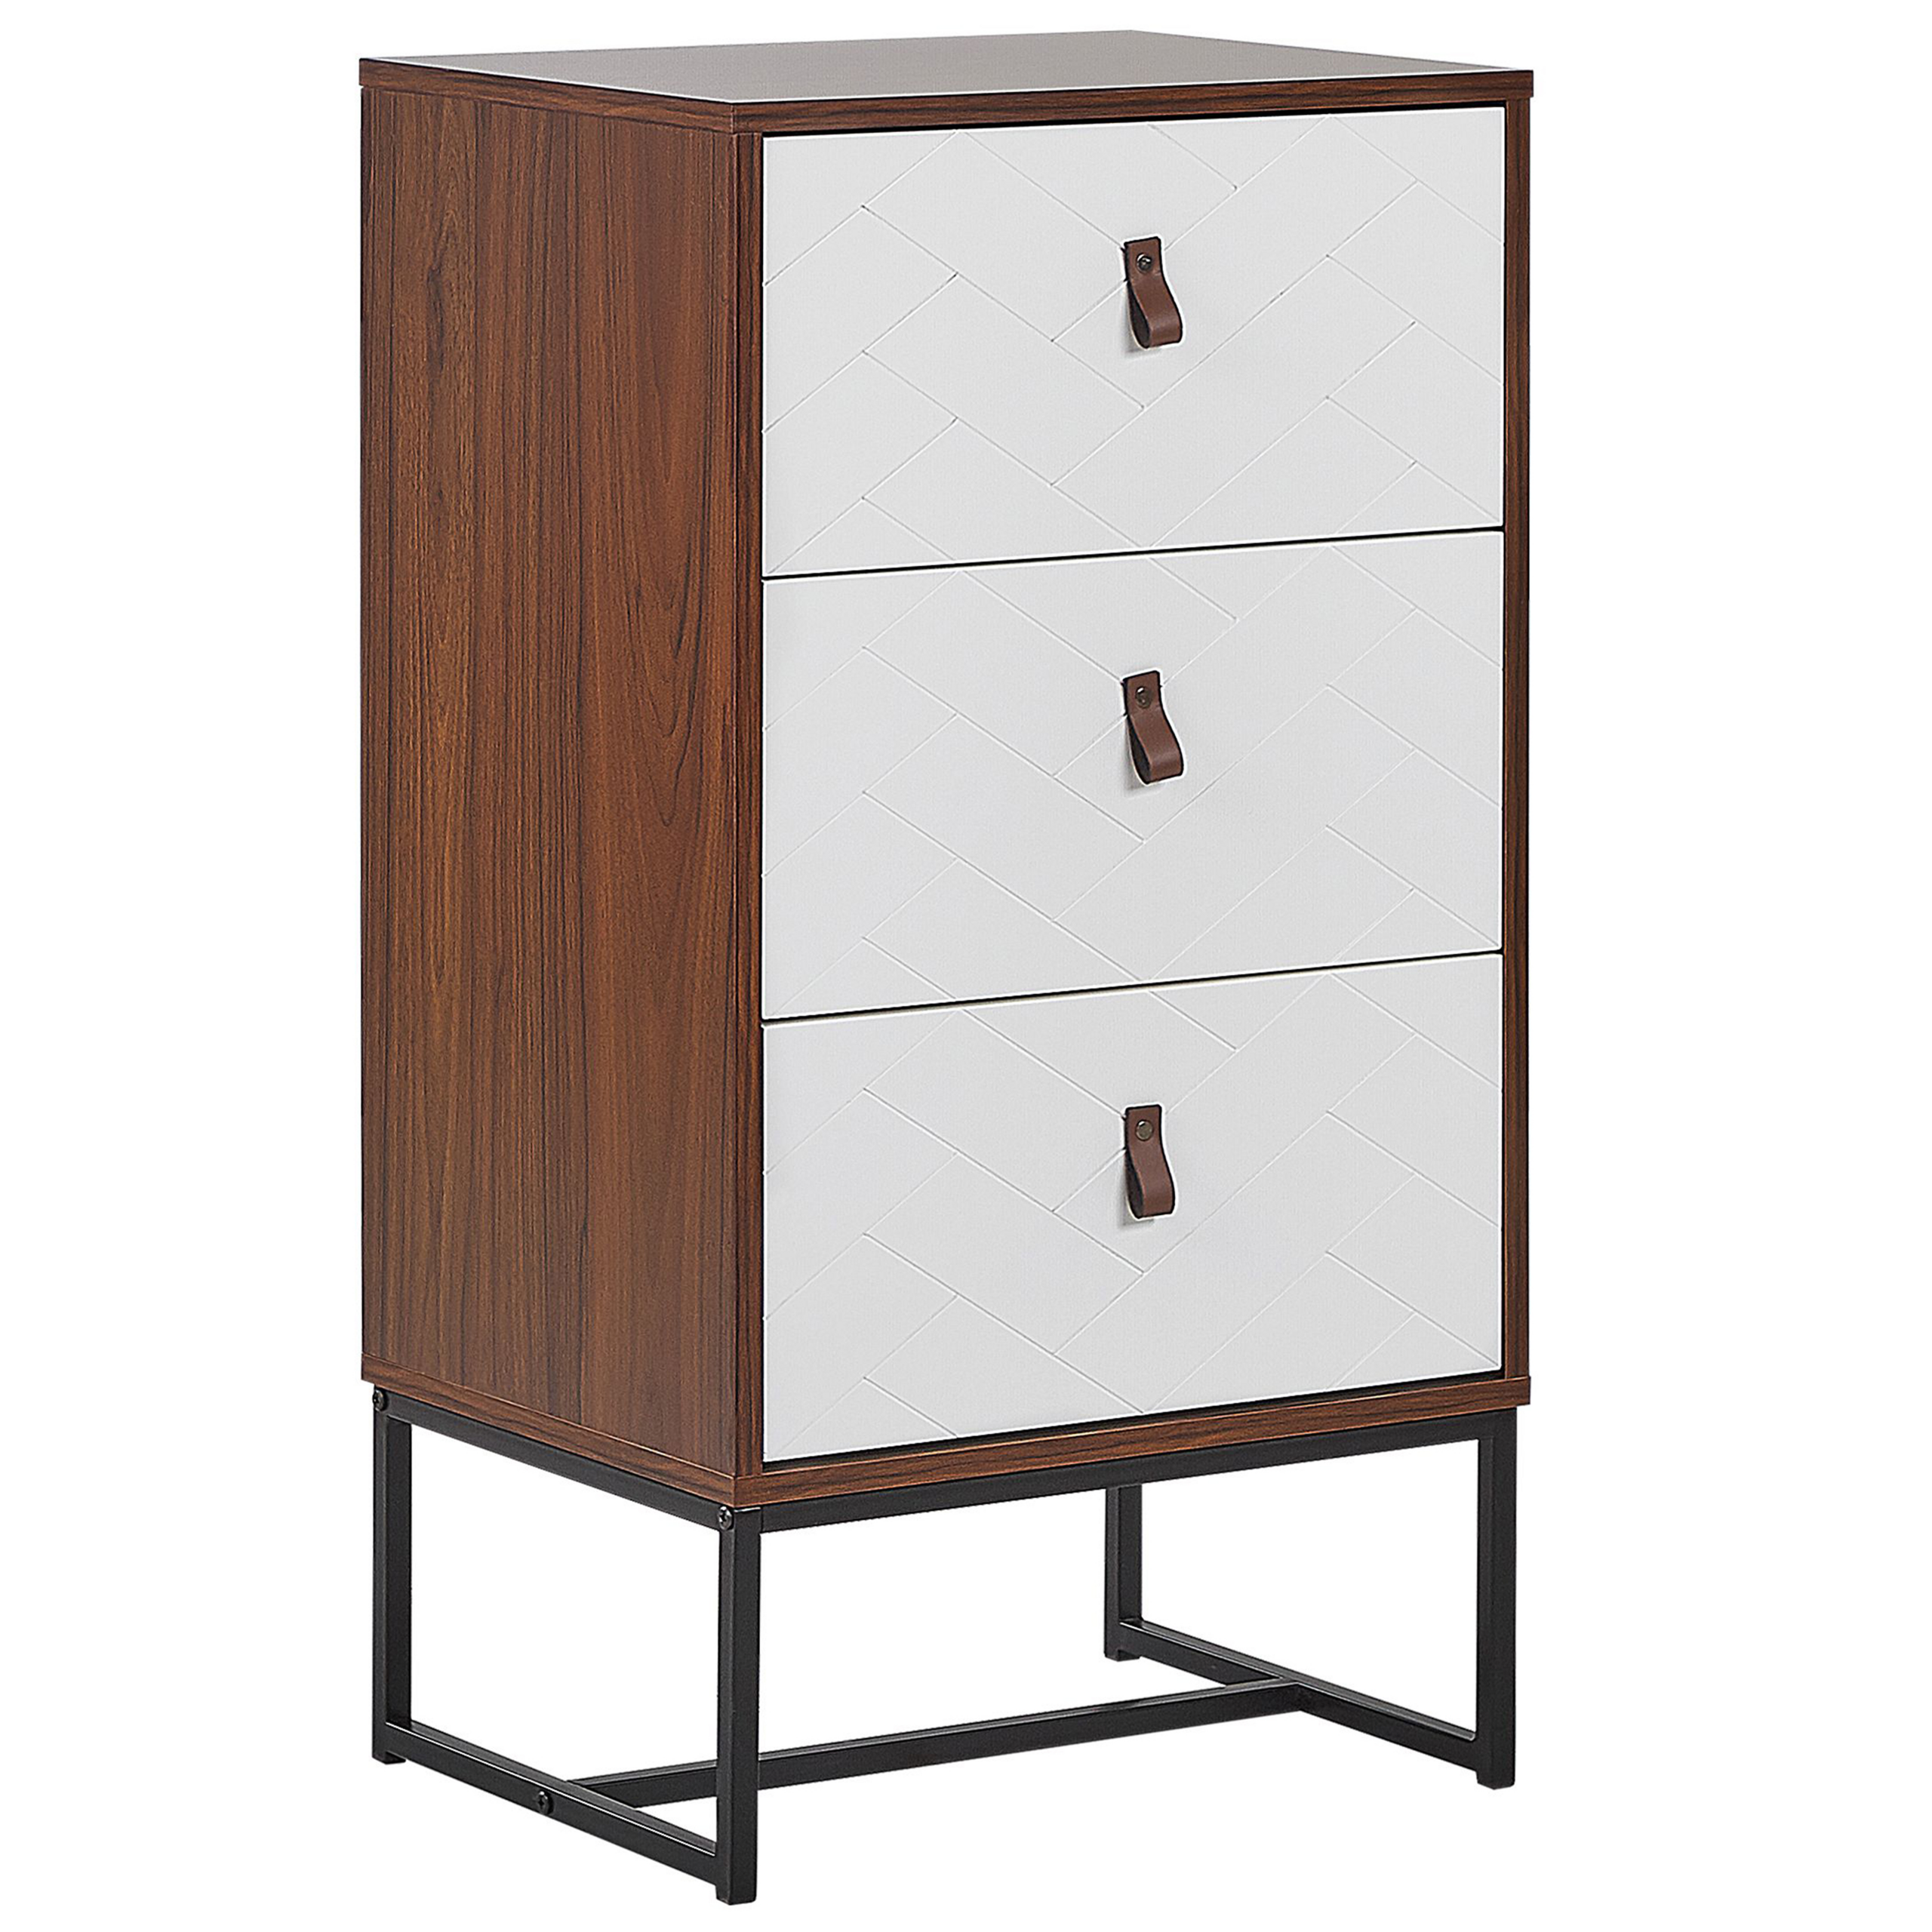 Beliani Chest of Drawers Dark Wood with White Metal Legs Storage Cabinet Dresser 91 x 49 cm Modern Traditional Living Room Furniture